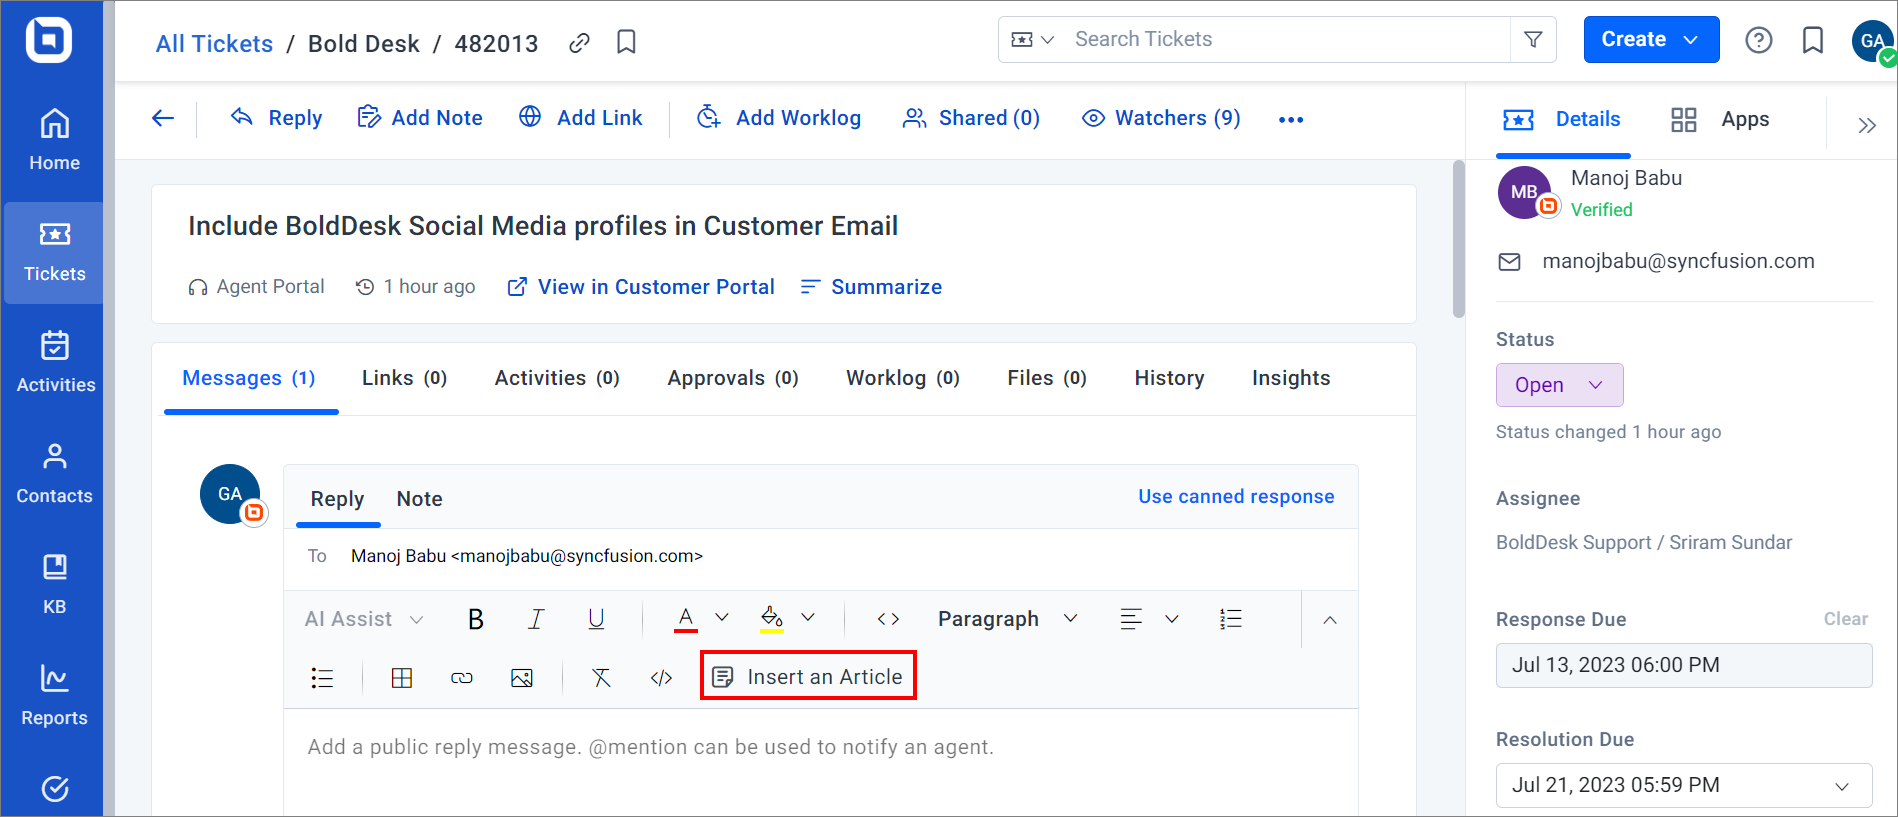 Embedding a knowledge base article in a ticket reply